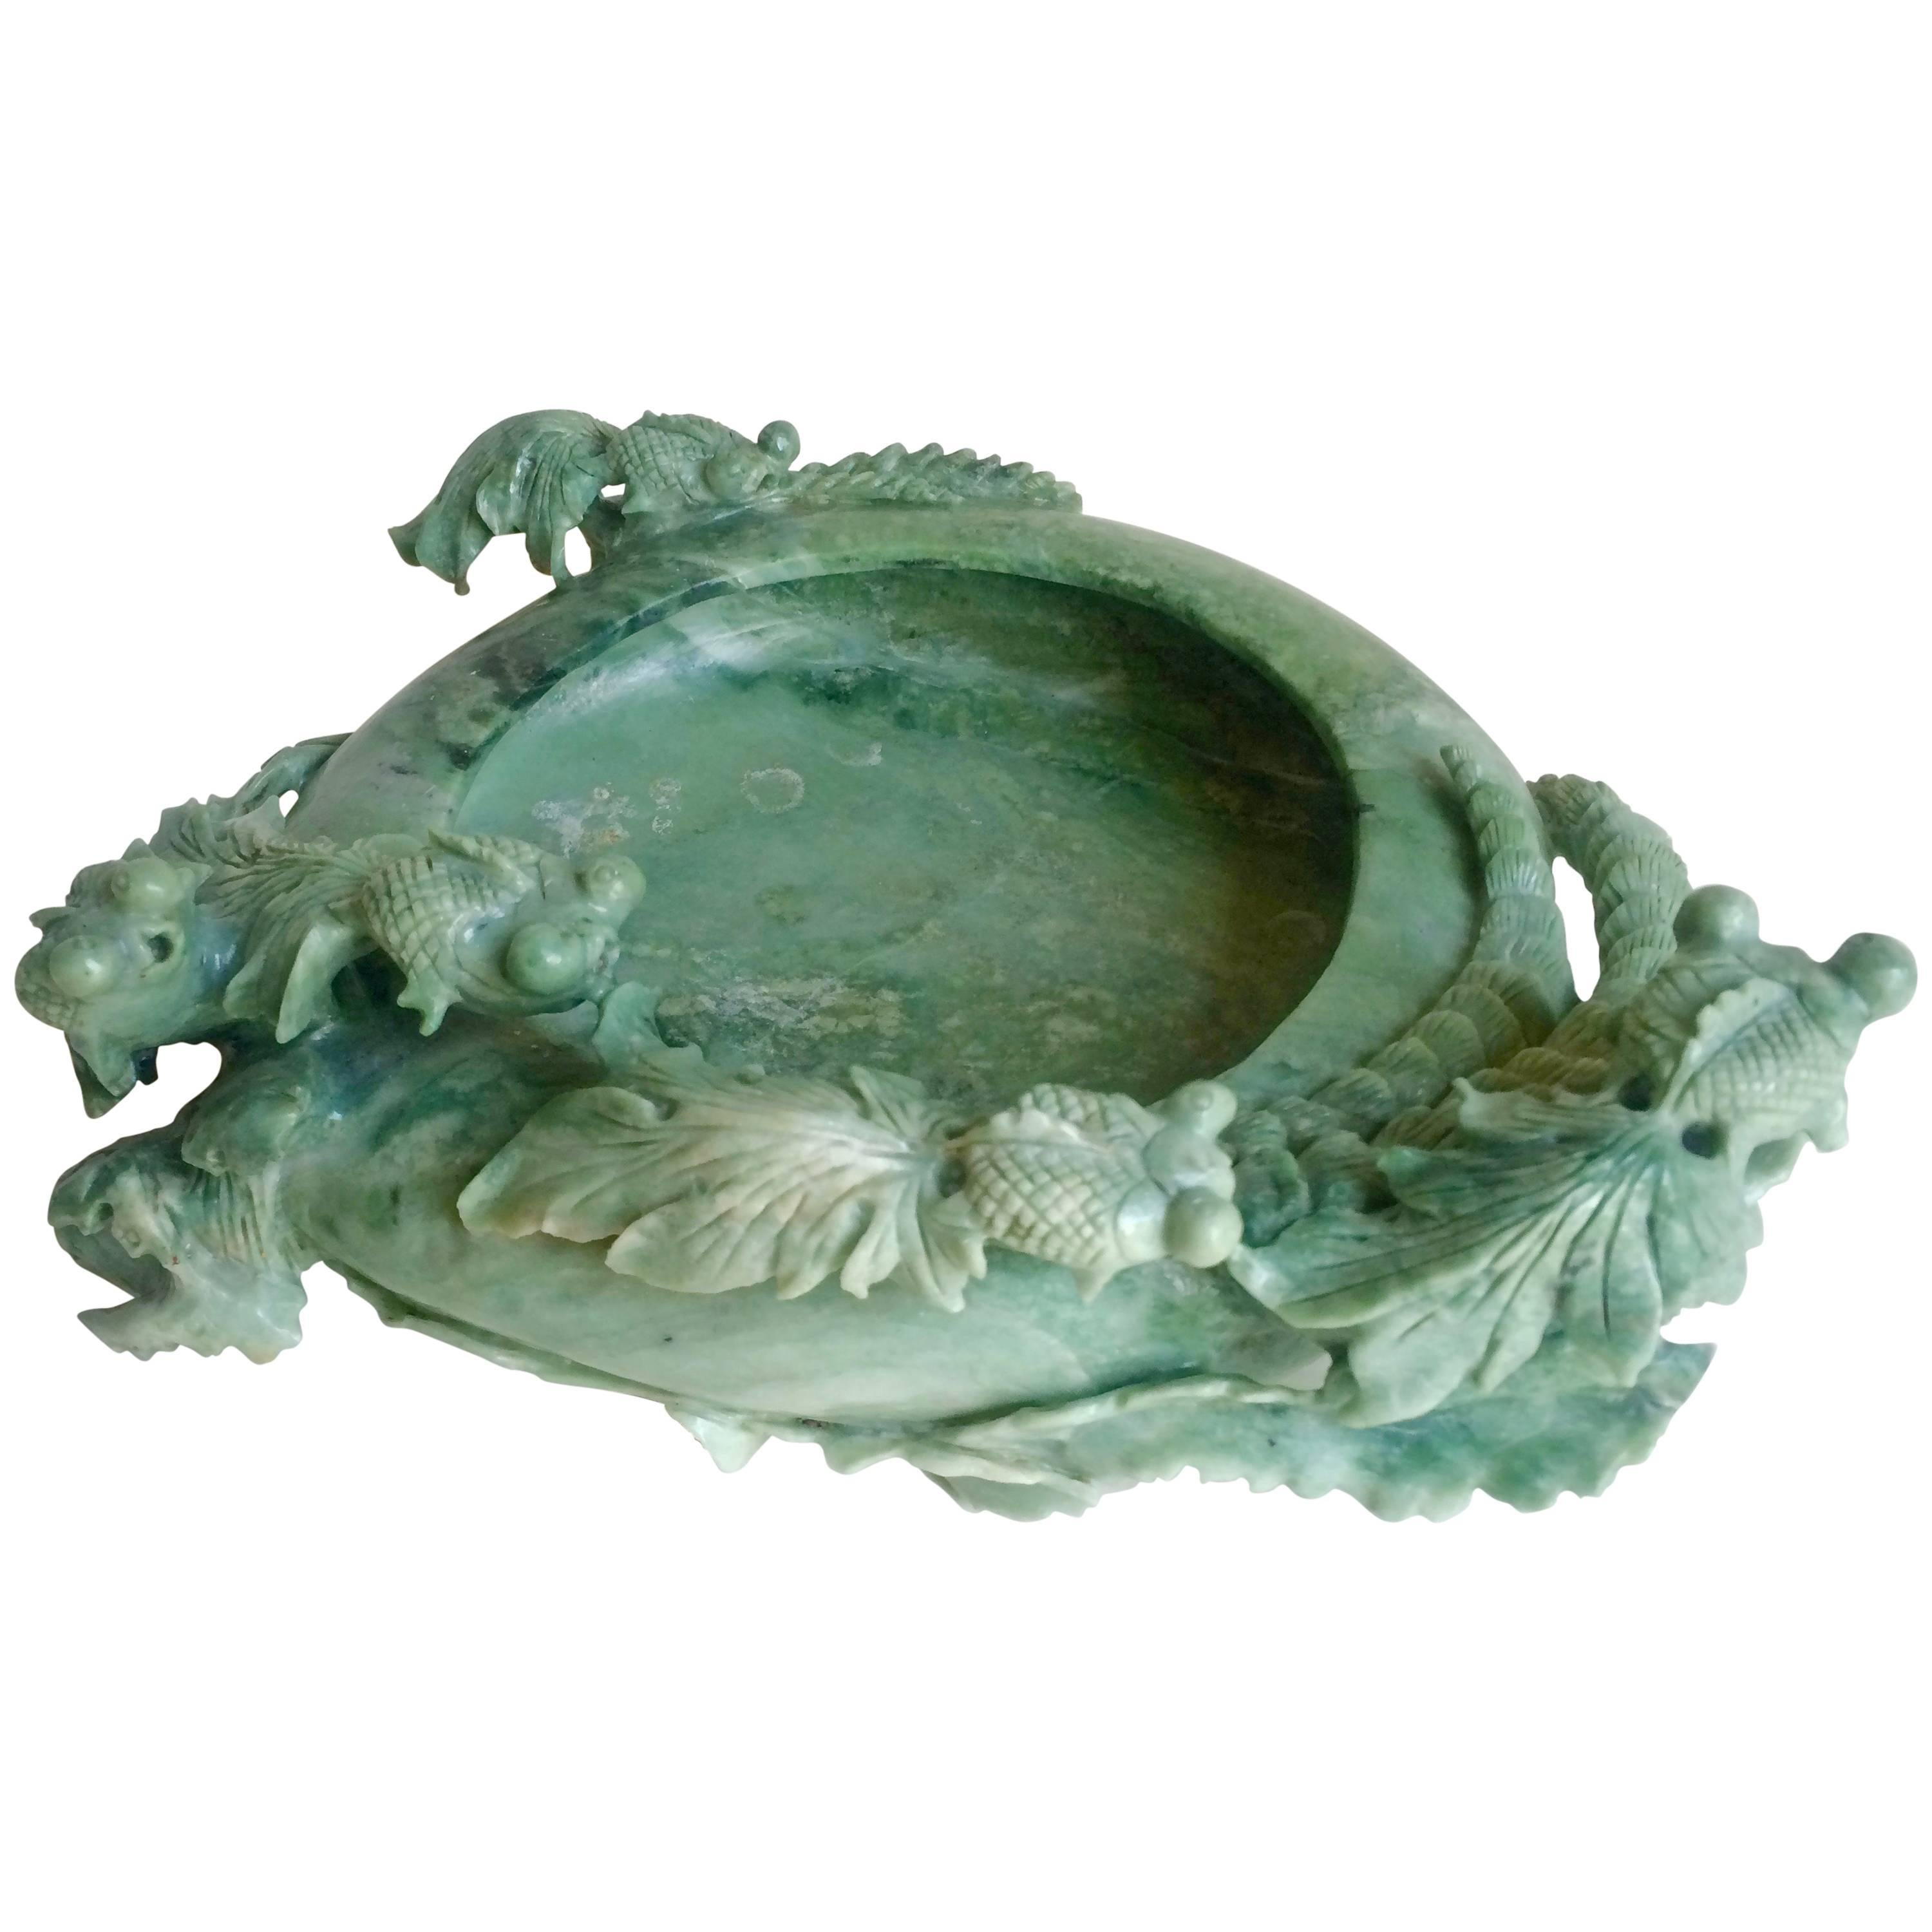 Hand-Carved Jade Bowl with Koi Fish Detail